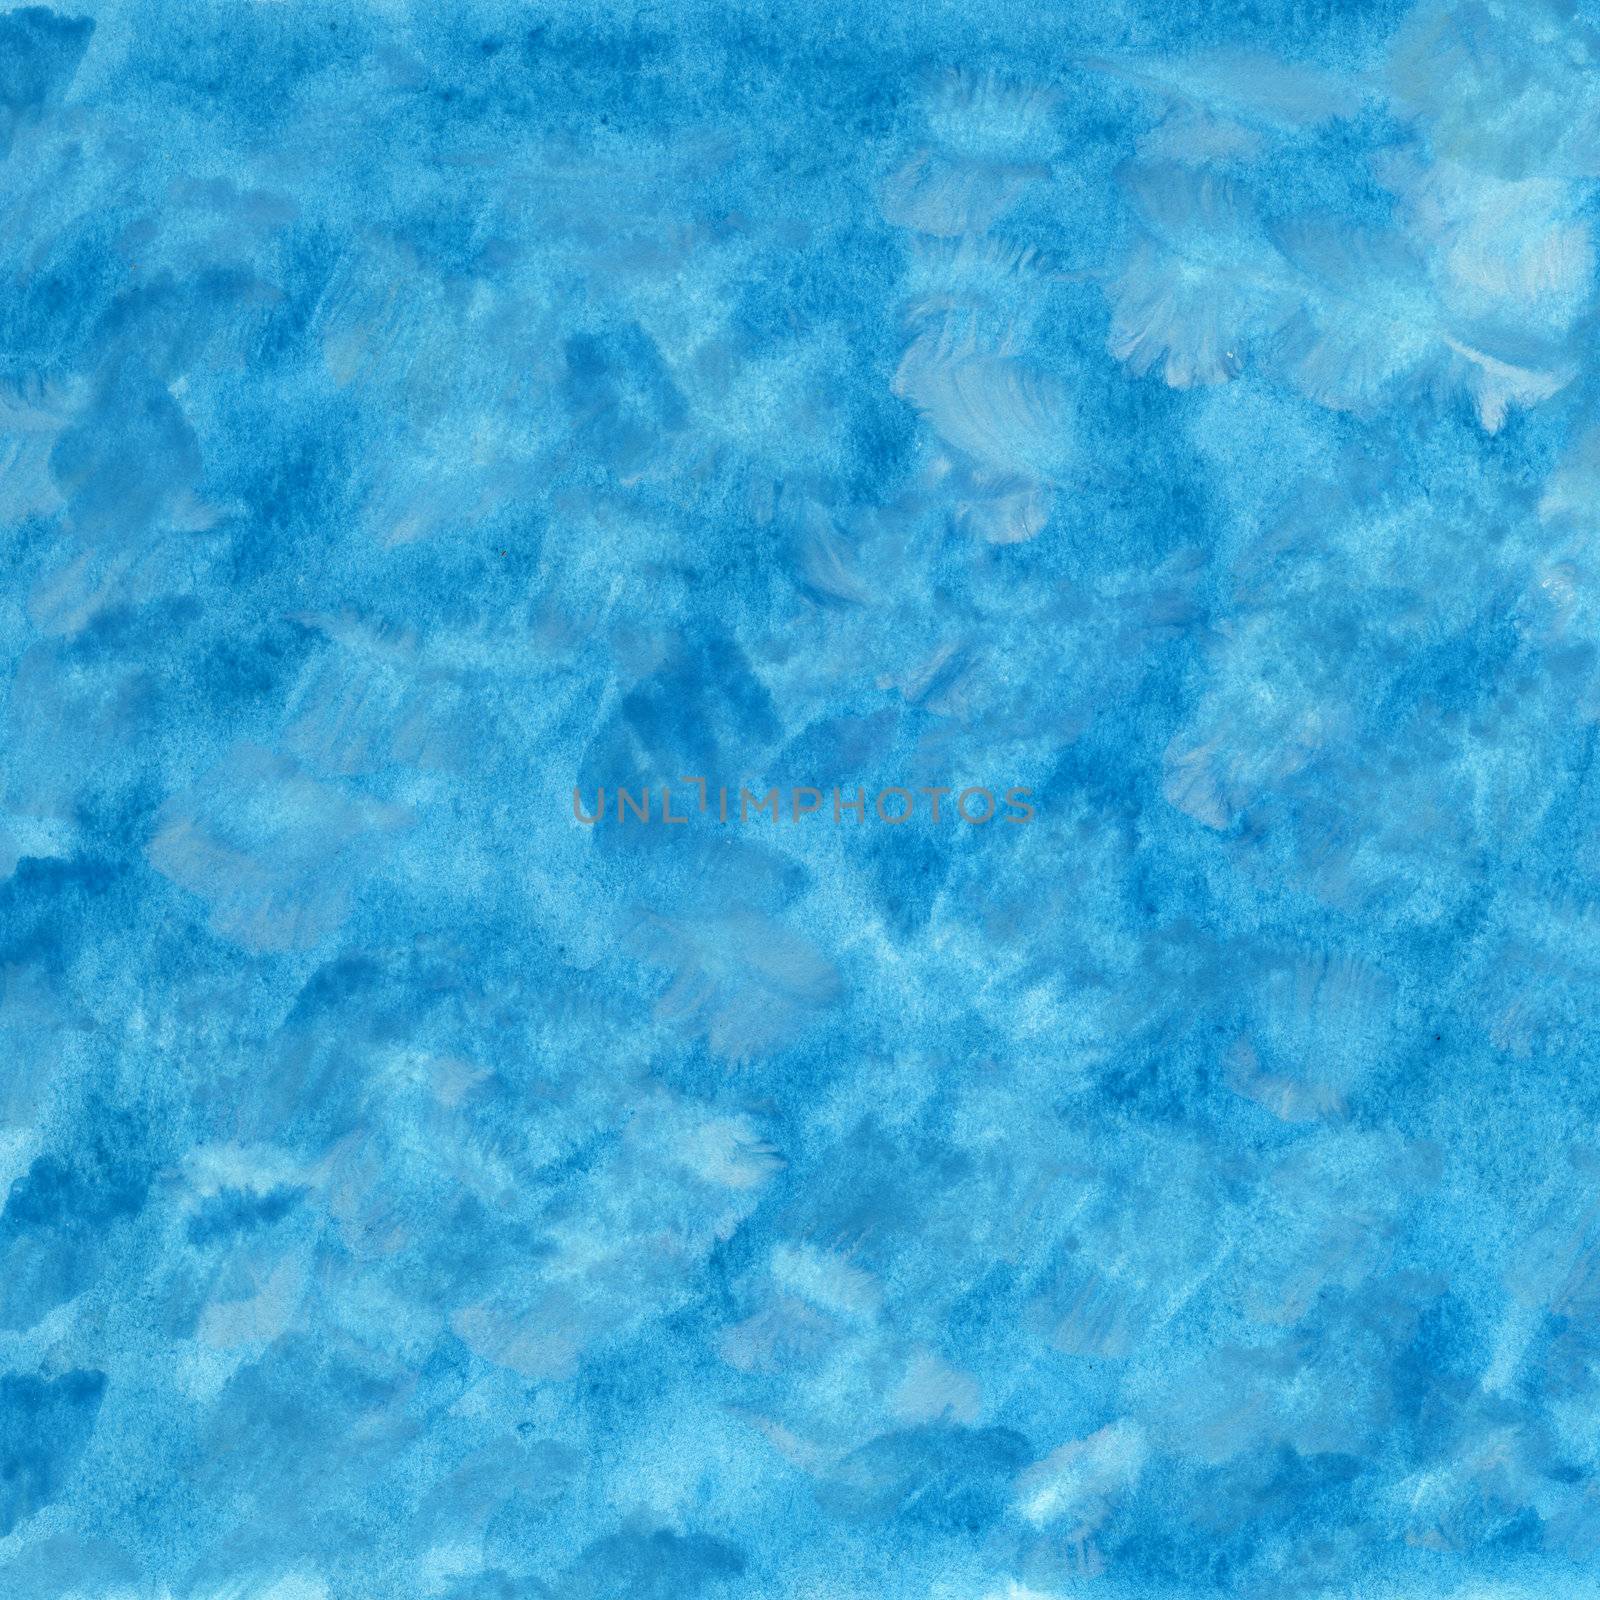 blue and white hand painted chaotic patchy watercolor background, self made